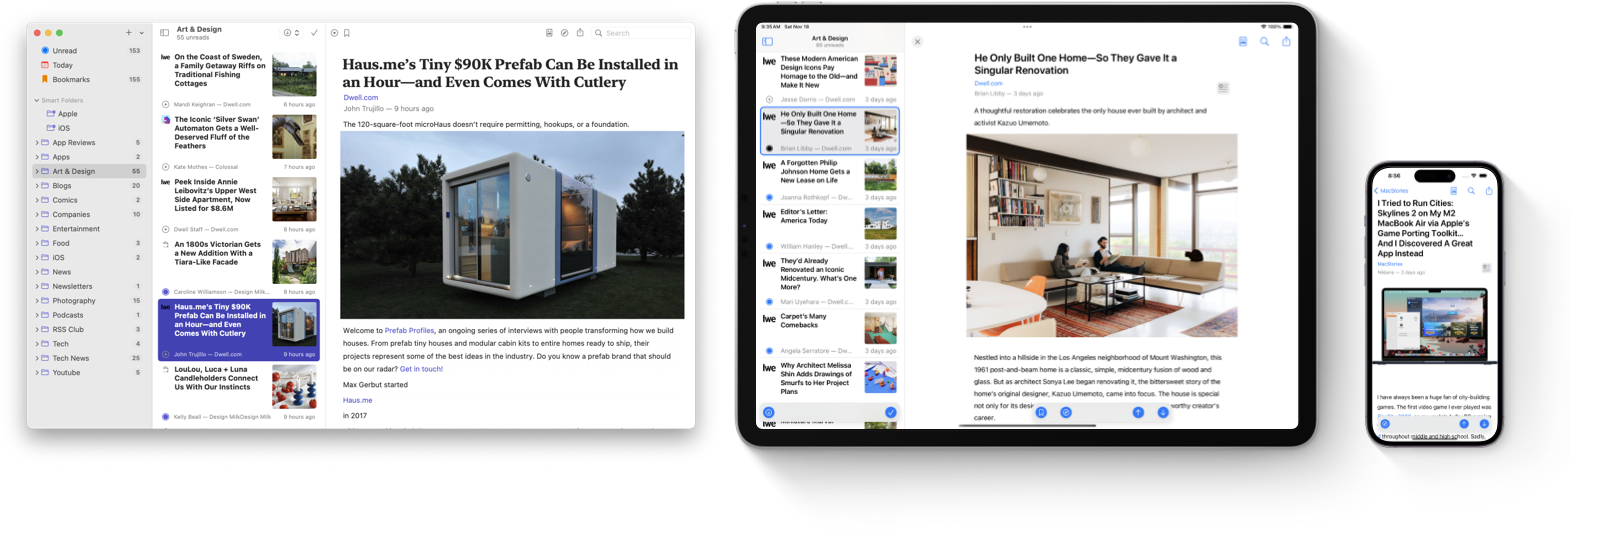 Elytra's timeline and article reader displayed on iPad, iPhone and macOS.